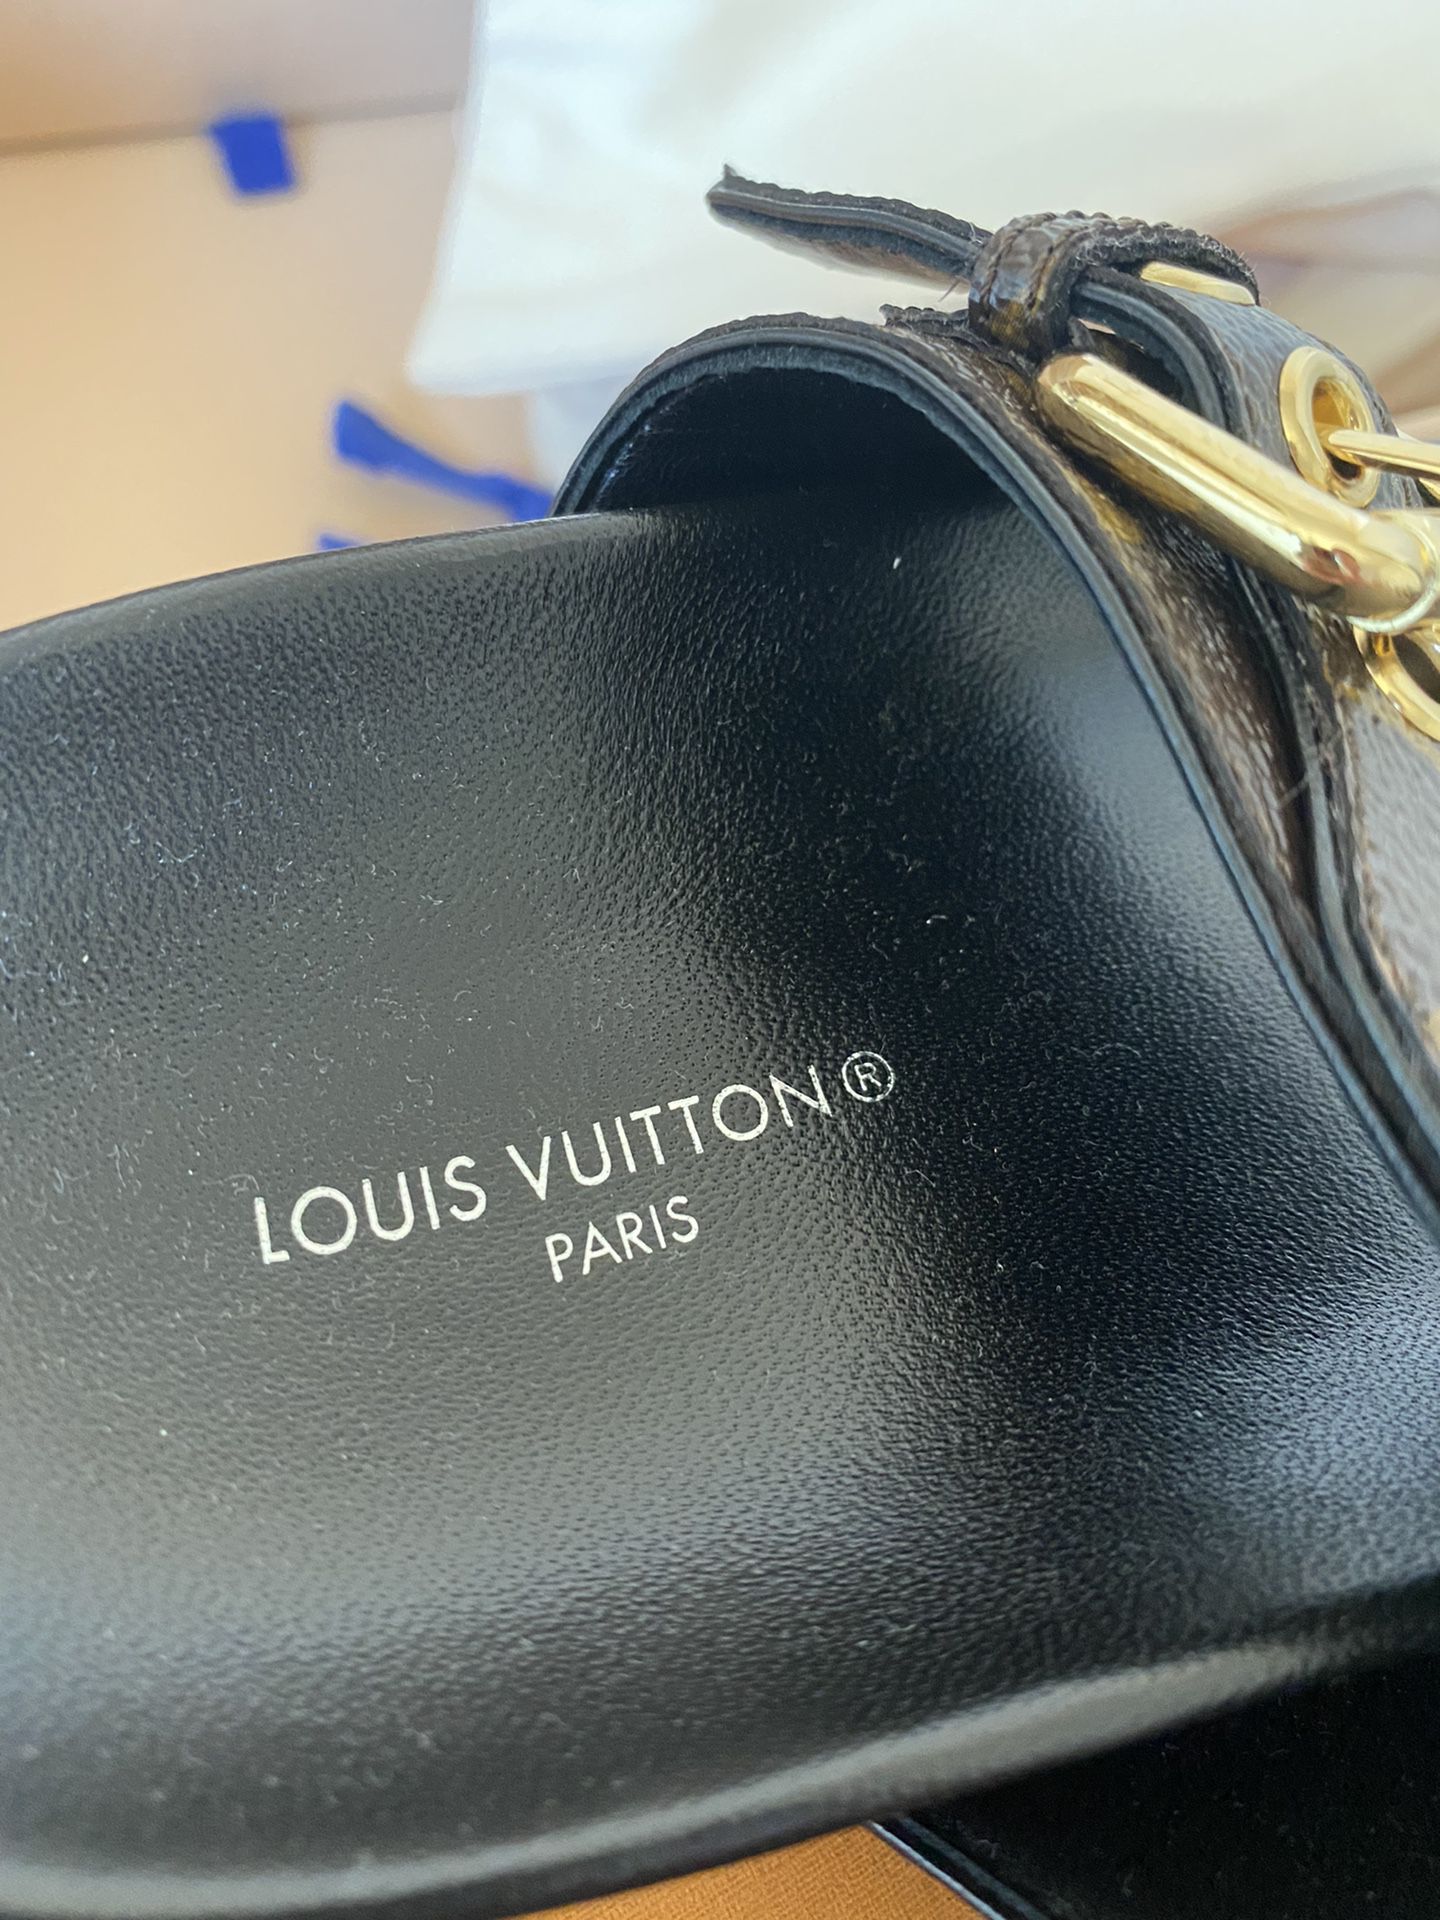 Louis Vuitton Bom Dia Shearling Black Flat Mules - Sold Out/Rare - Us size 6